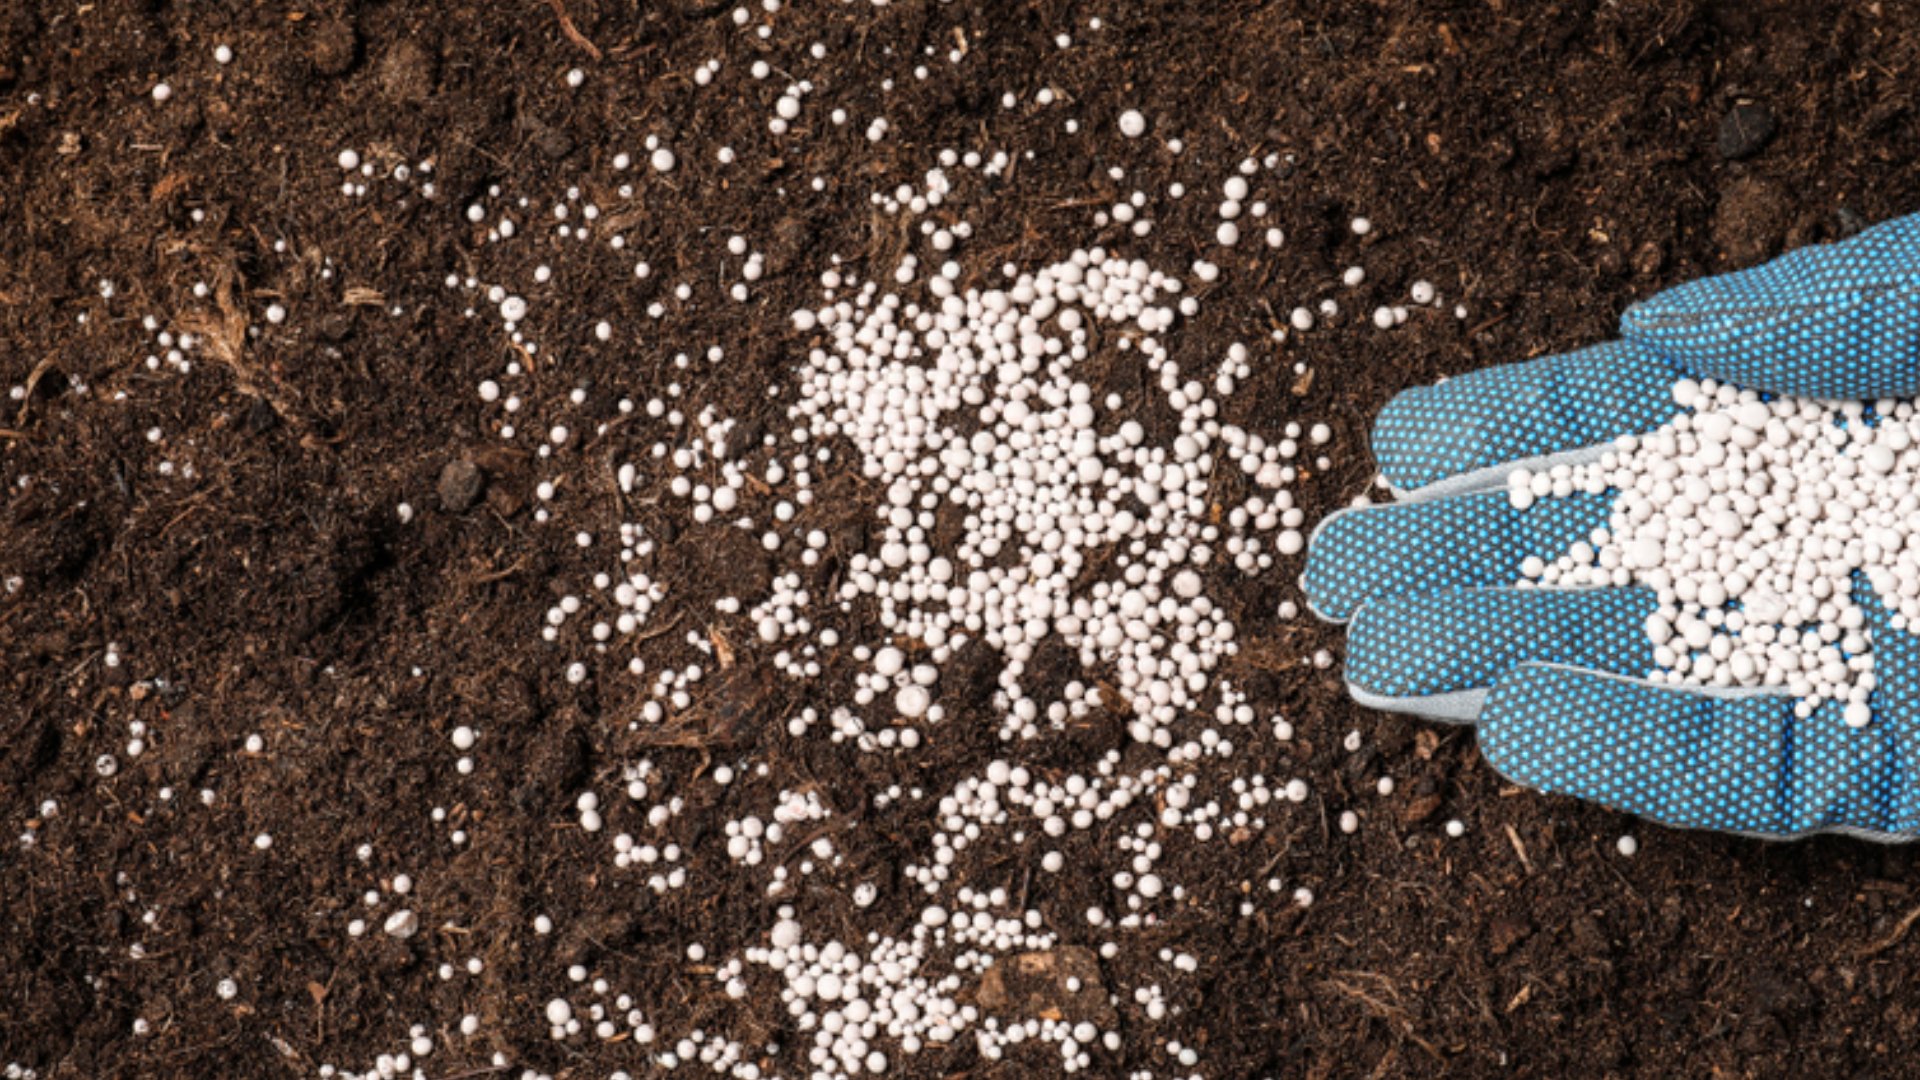 Organic-Based Fertilizer vs Synthetic Fertilizer - Which Option Is Better?